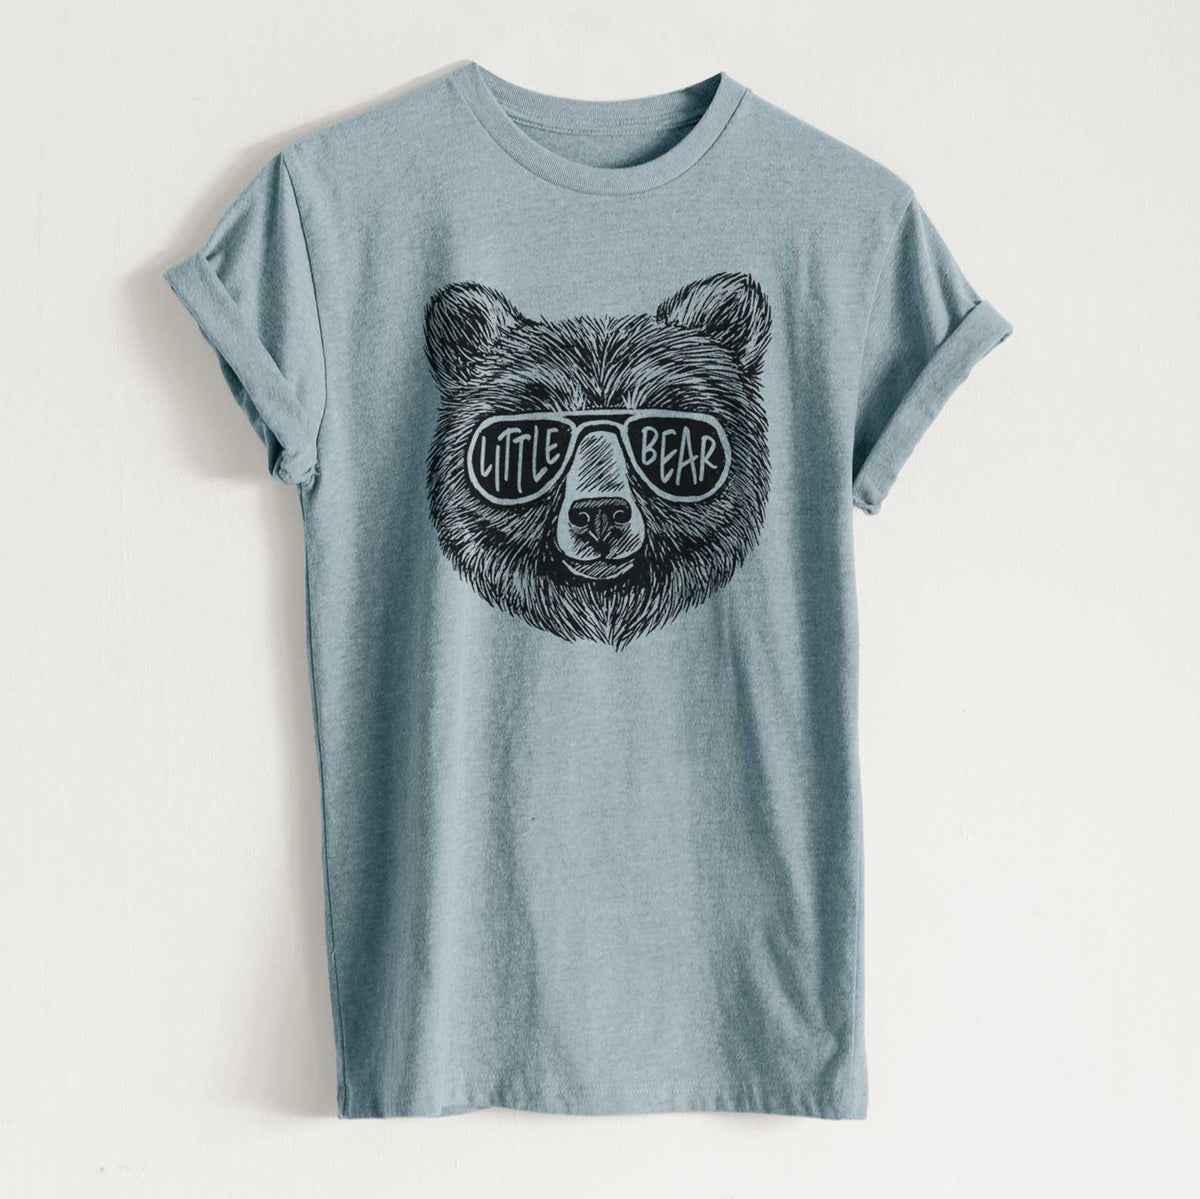 Little Bear - Unisex Recycled Eco Tee  - CLOSEOUT - FINAL SALE